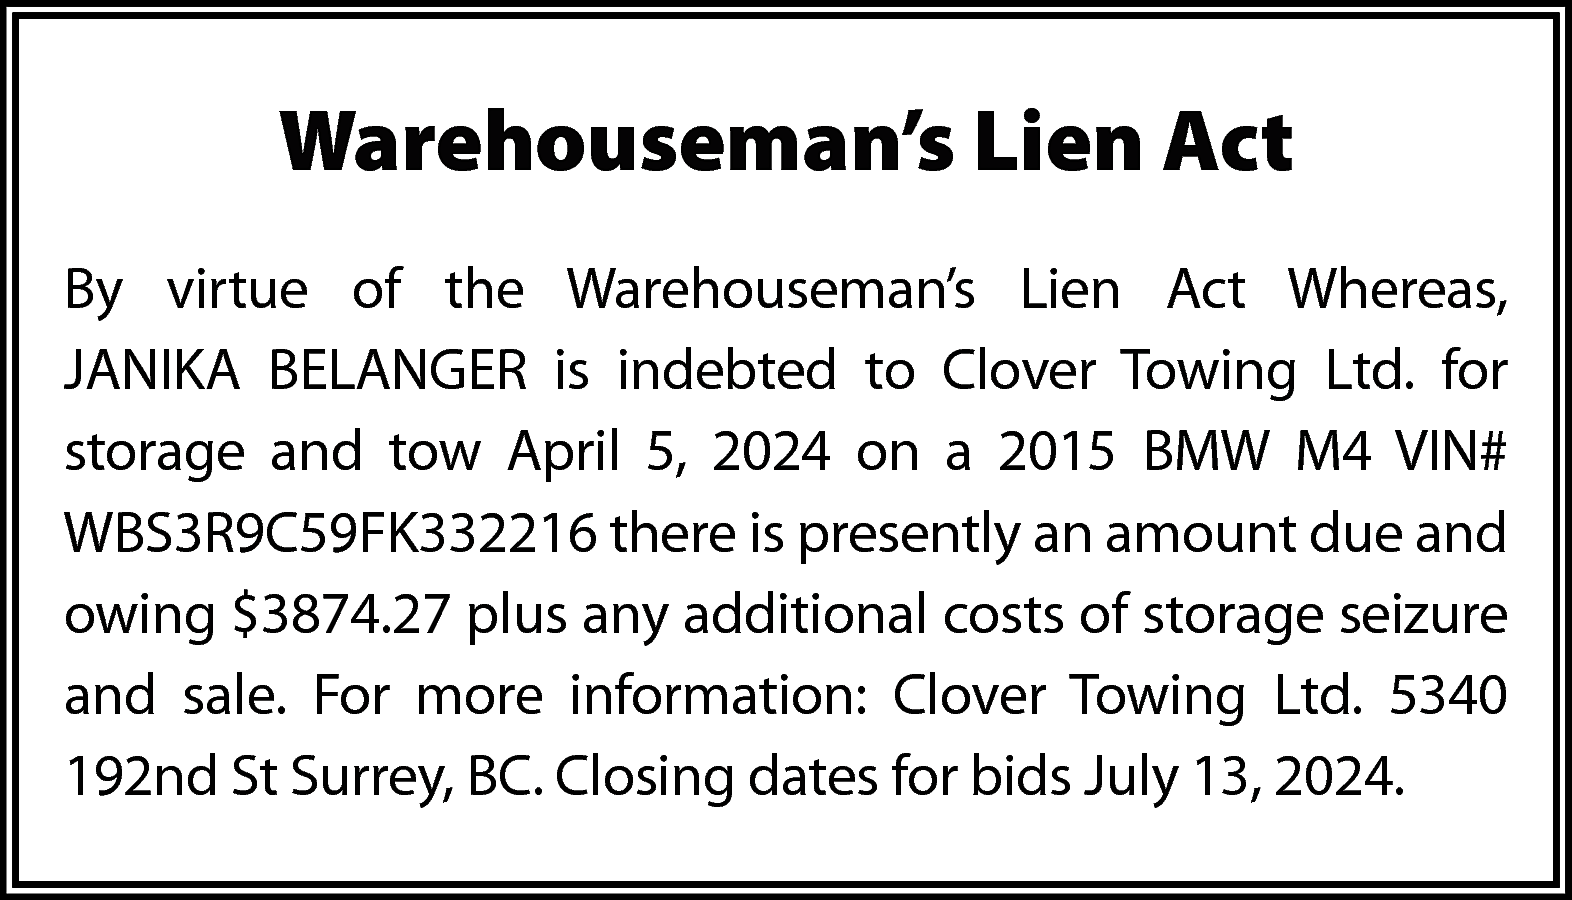 Warehouseman’s Lien Act <br>By virtue  Warehouseman’s Lien Act  By virtue of the Warehouseman’s Lien Act Whereas,  JANIKA BELANGER is indebted to Clover Towing Ltd. for  storage and tow April 5, 2024 on a 2015 BMW M4 VIN#  WBS3R9C59FK332216 there is presently an amount due and  owing $3874.27 plus any additional costs of storage seizure  and sale. For more information: Clover Towing Ltd. 5340  192nd St Surrey, BC. Closing dates for bids July 13, 2024.    